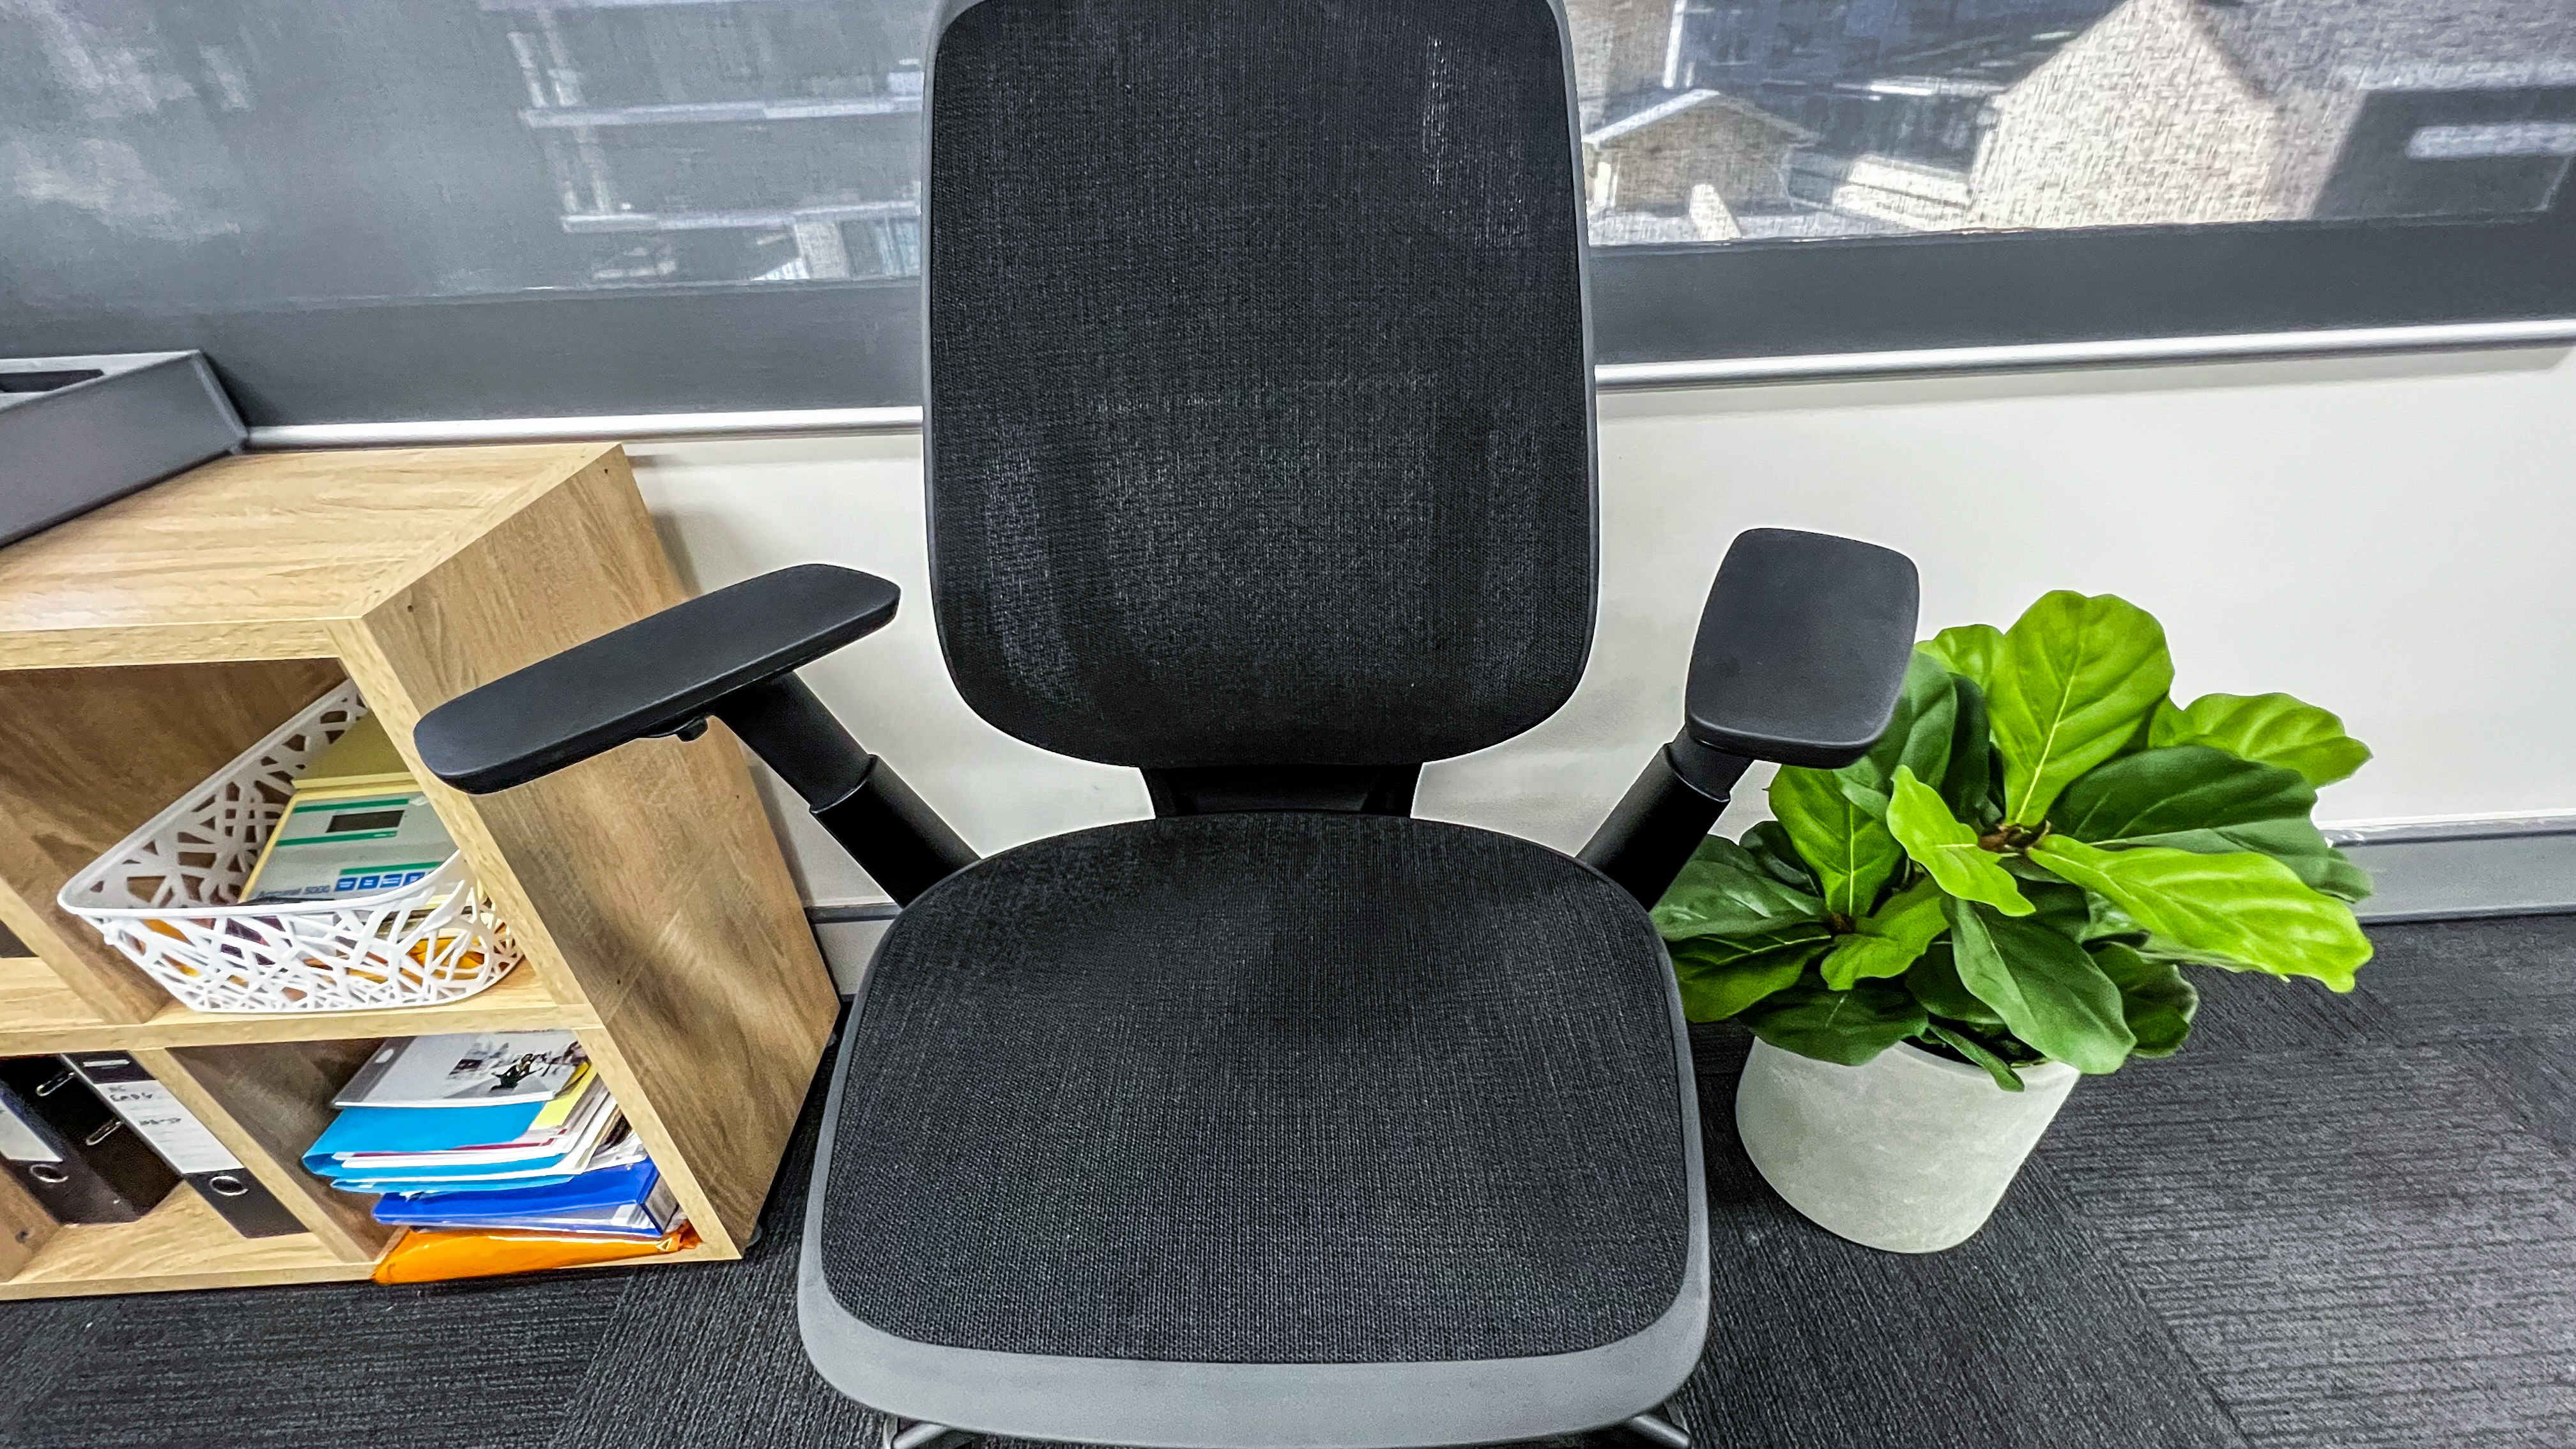 Armrests differently adjusted on the Steelcase Karman